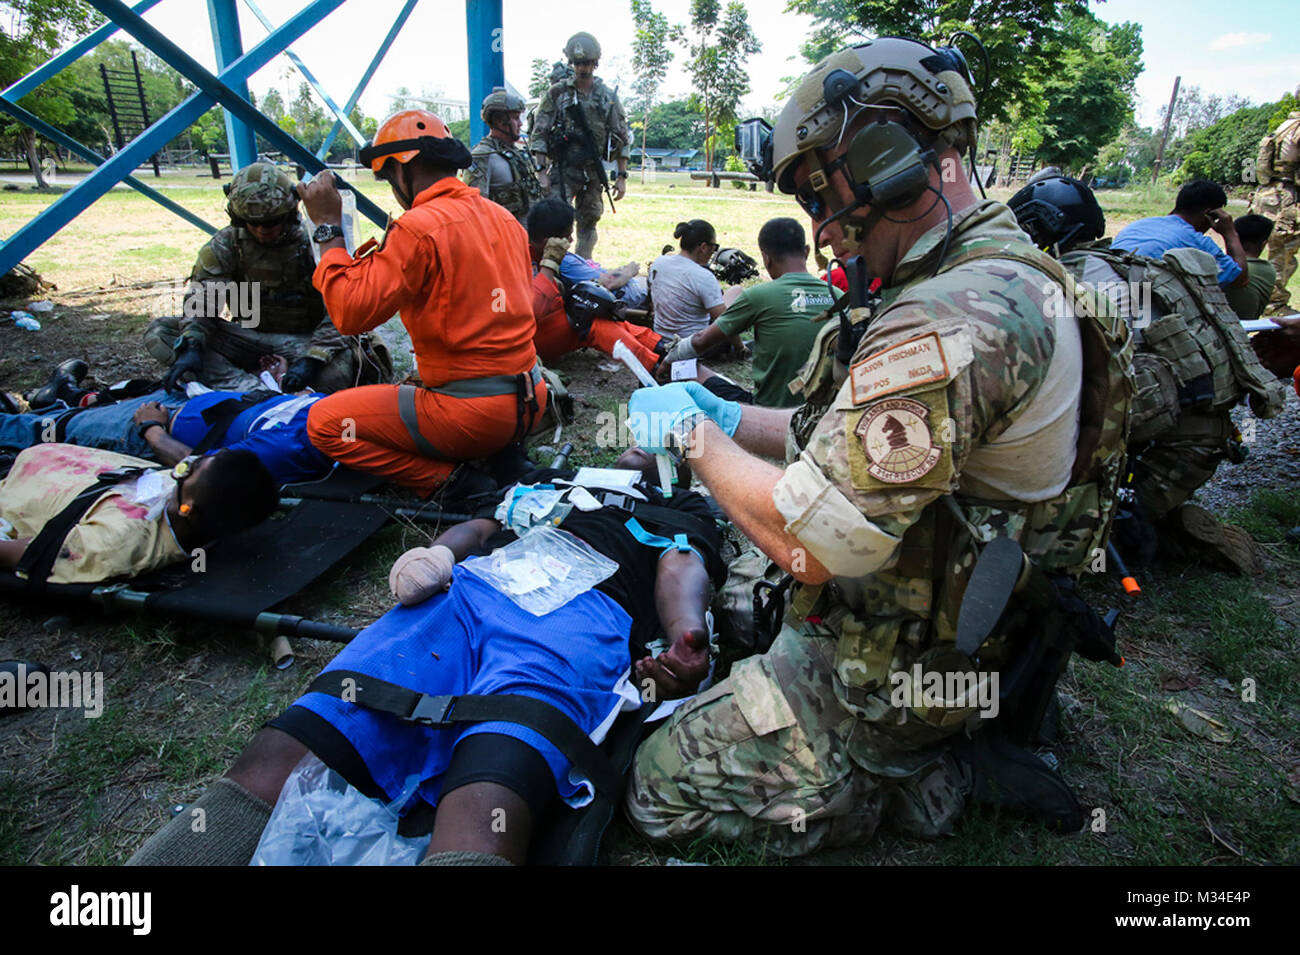 U.S. Air Force Staff Sgt. Jason Fischman, a pararescueman with 31st Rescue Squadron, assists victims of a plane crash as part of a notional mass casualty incident during Exercise Balikatan 2015, in Clark Air Base, Philippines, April 24. The drill was conducted alongside rescuemen from the 505th Rescue and Search Group of the Philippine Air Force. The bilateral training event provided both rescue teams with a better understanding of how each other operates and ensures mission accomplishment should they work side-by-side in the future. Balikatan is an annual Philippines-U.S. military training ex Stock Photo